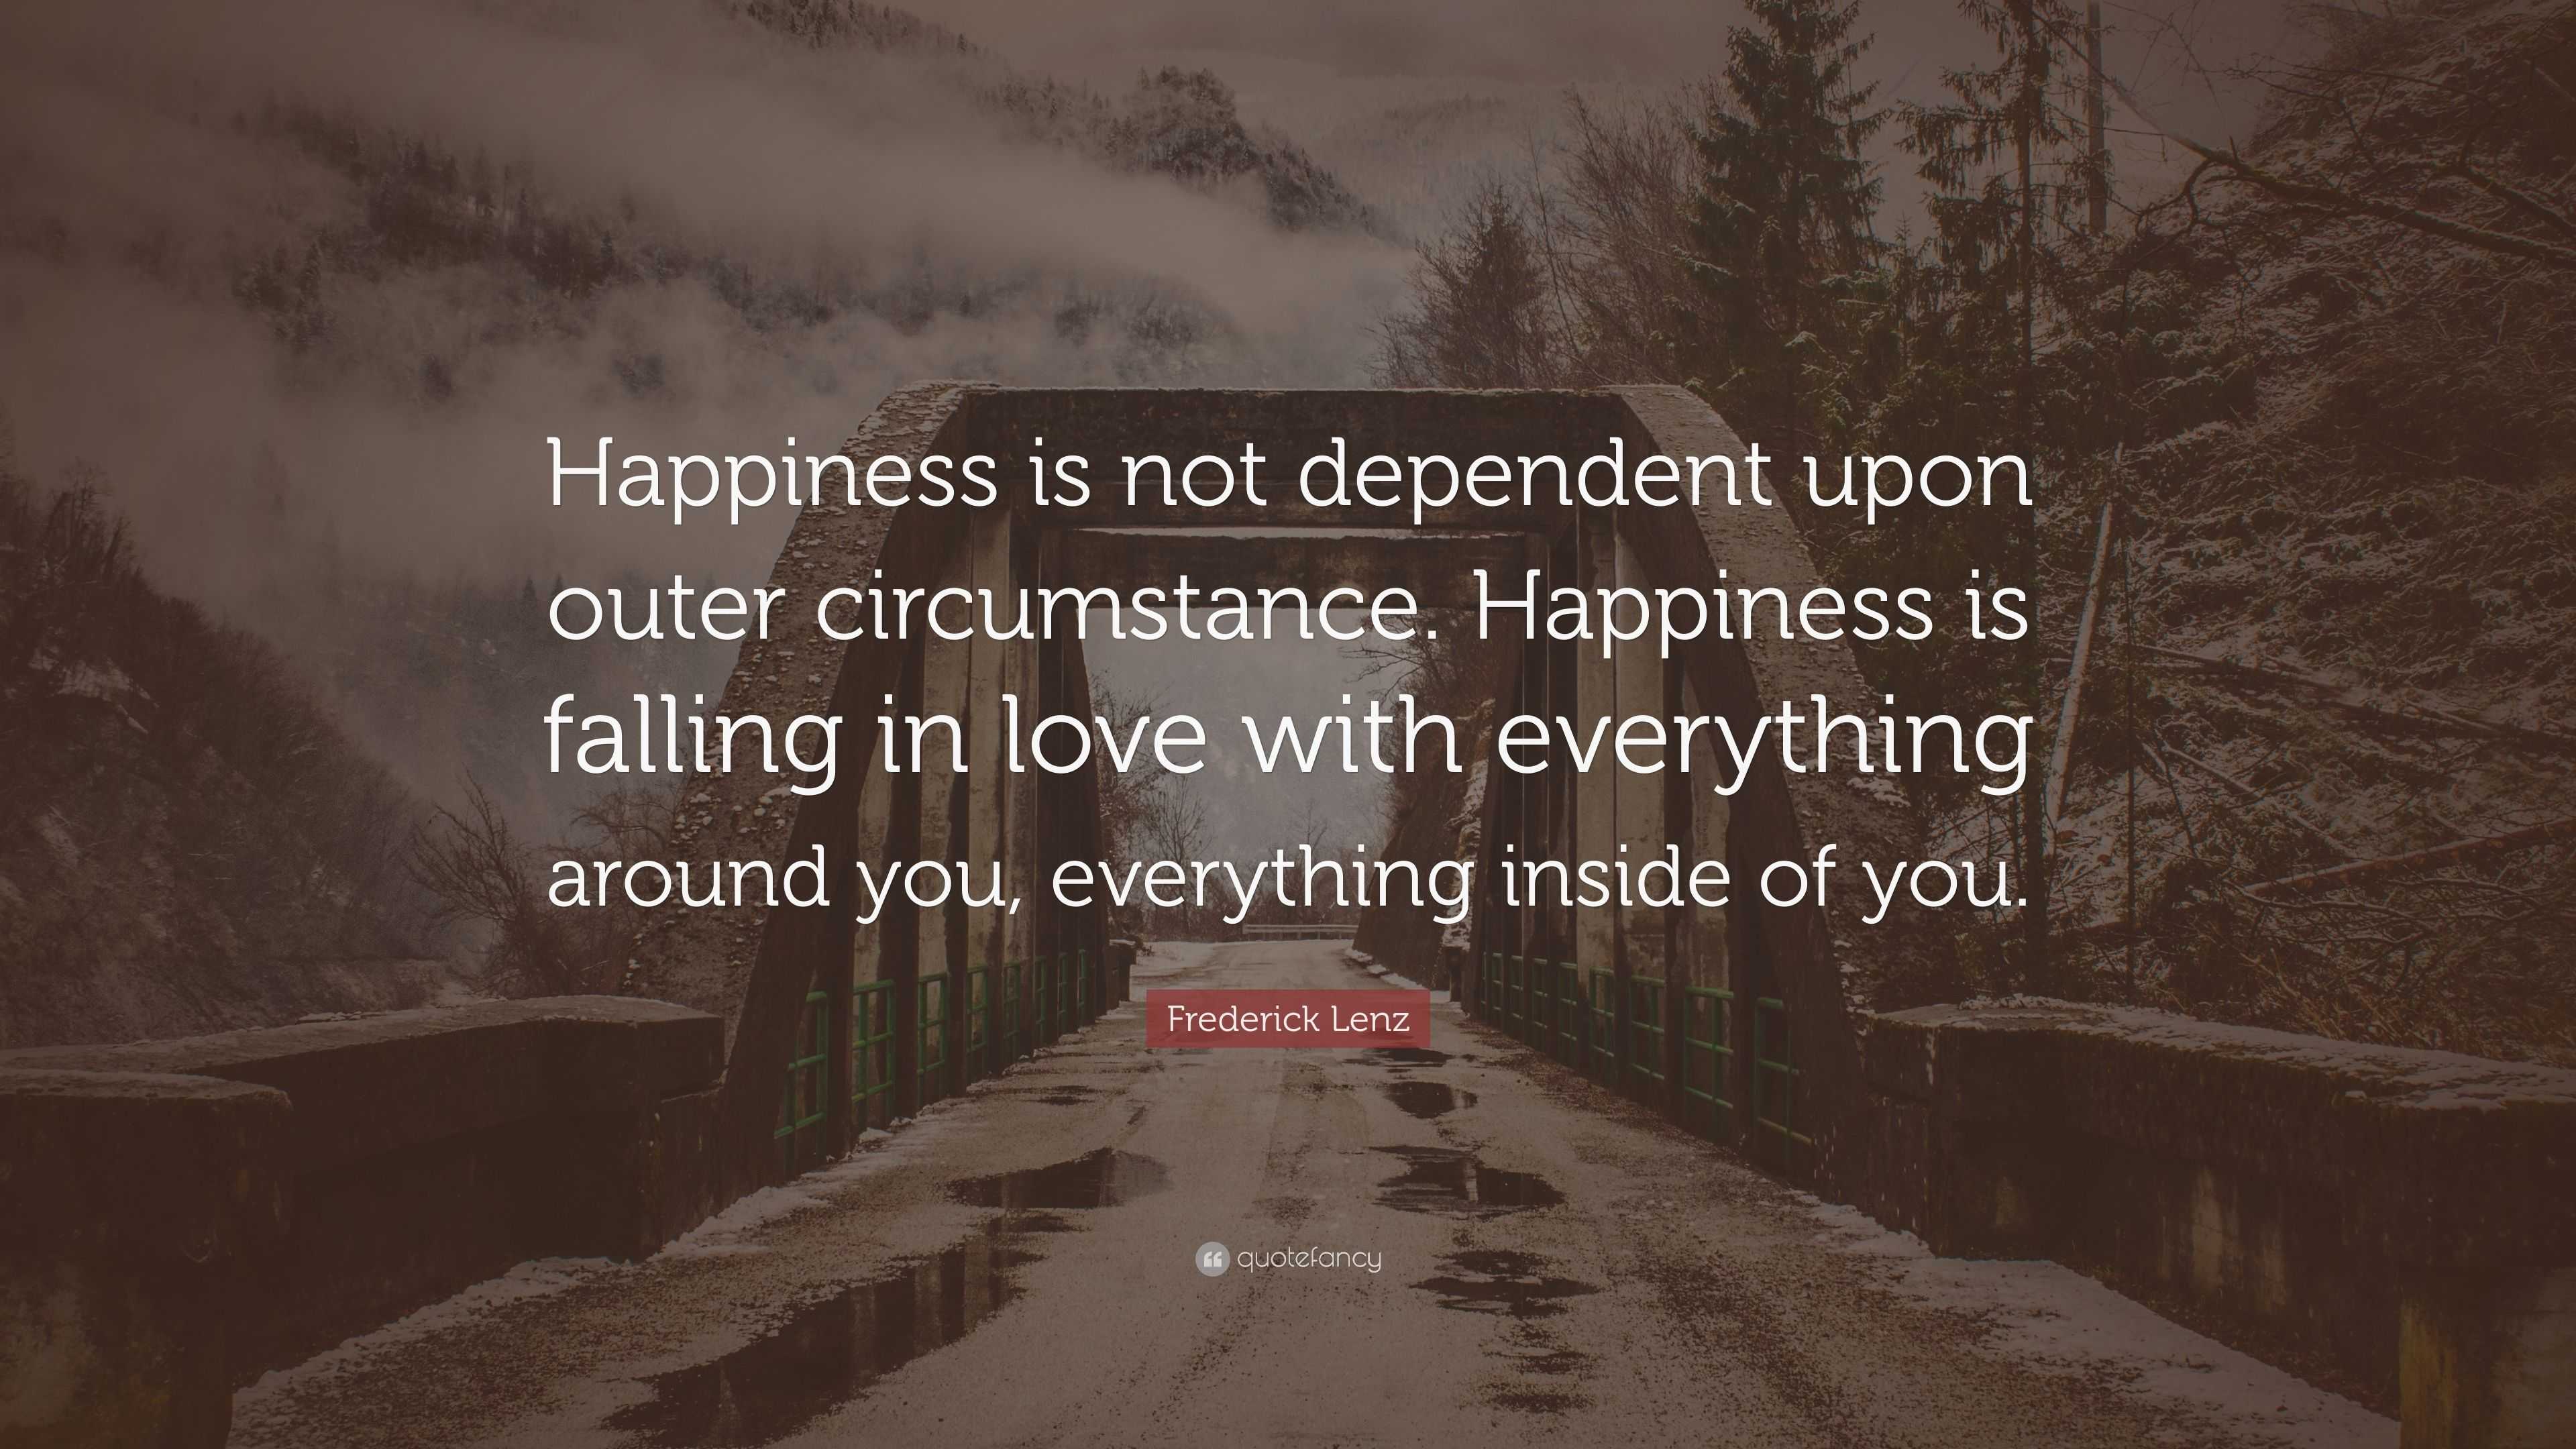 Frederick Lenz Quote: “Happiness is not dependent upon outer ...